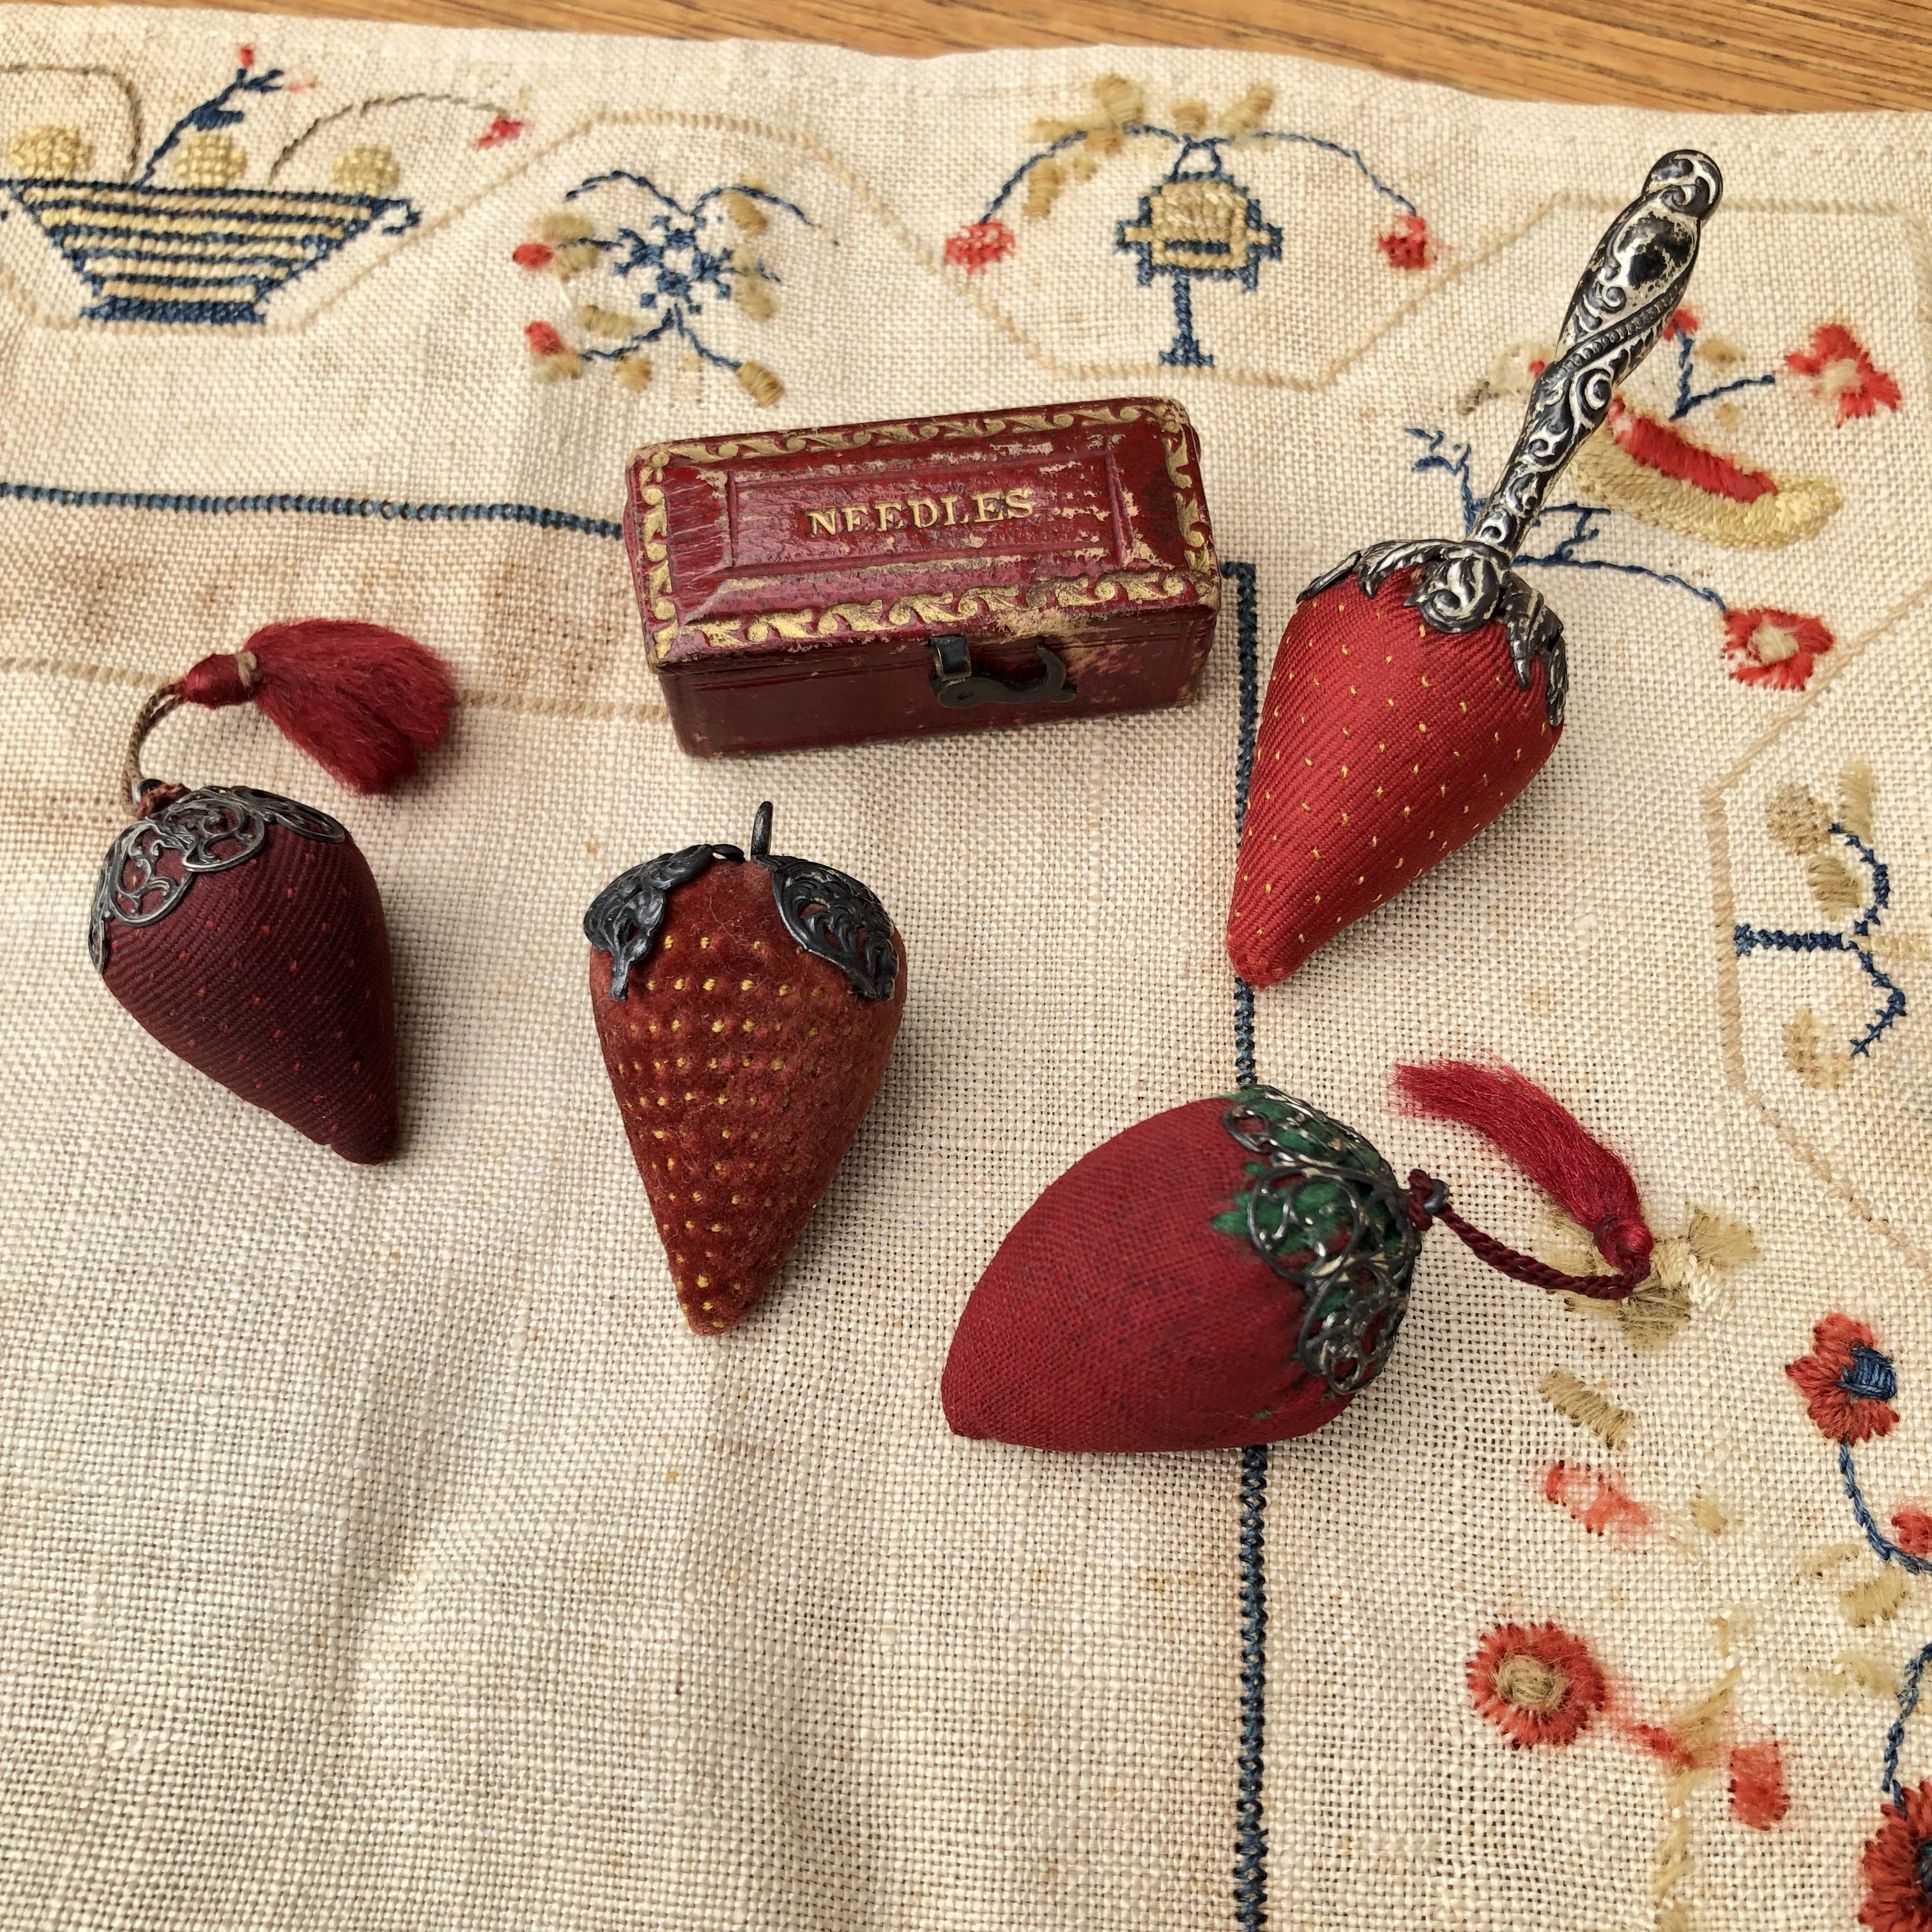 CHARMING Vintage Large Tomato Pin Cushion and Strawberry Emery